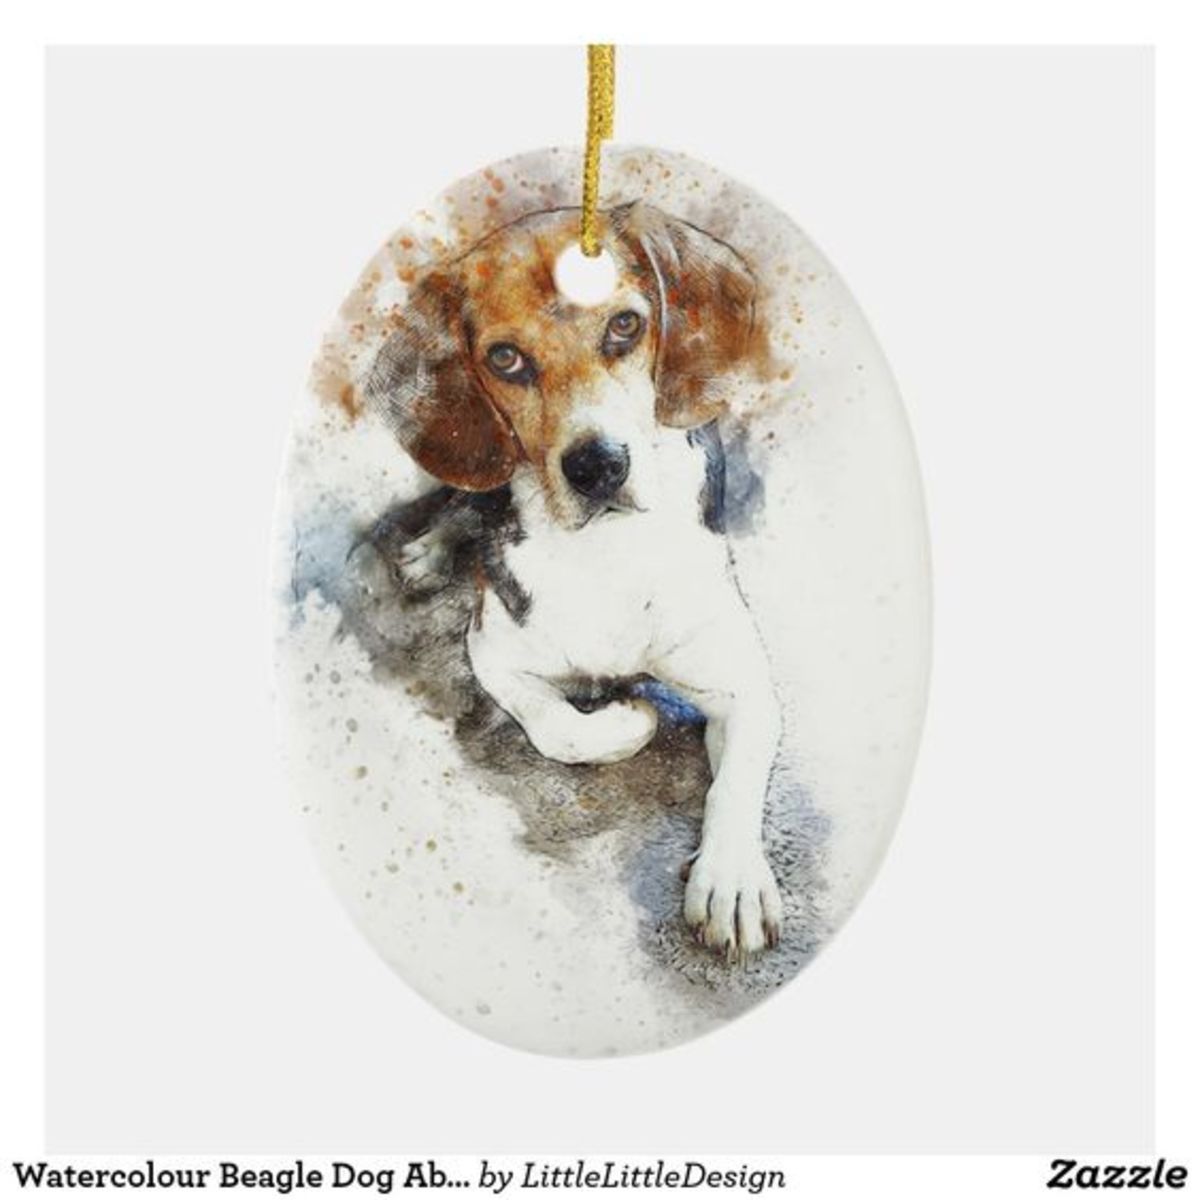 This is a beautiful beagle ornament done in watercolors and it looks like our Lady Luna Lovegood.